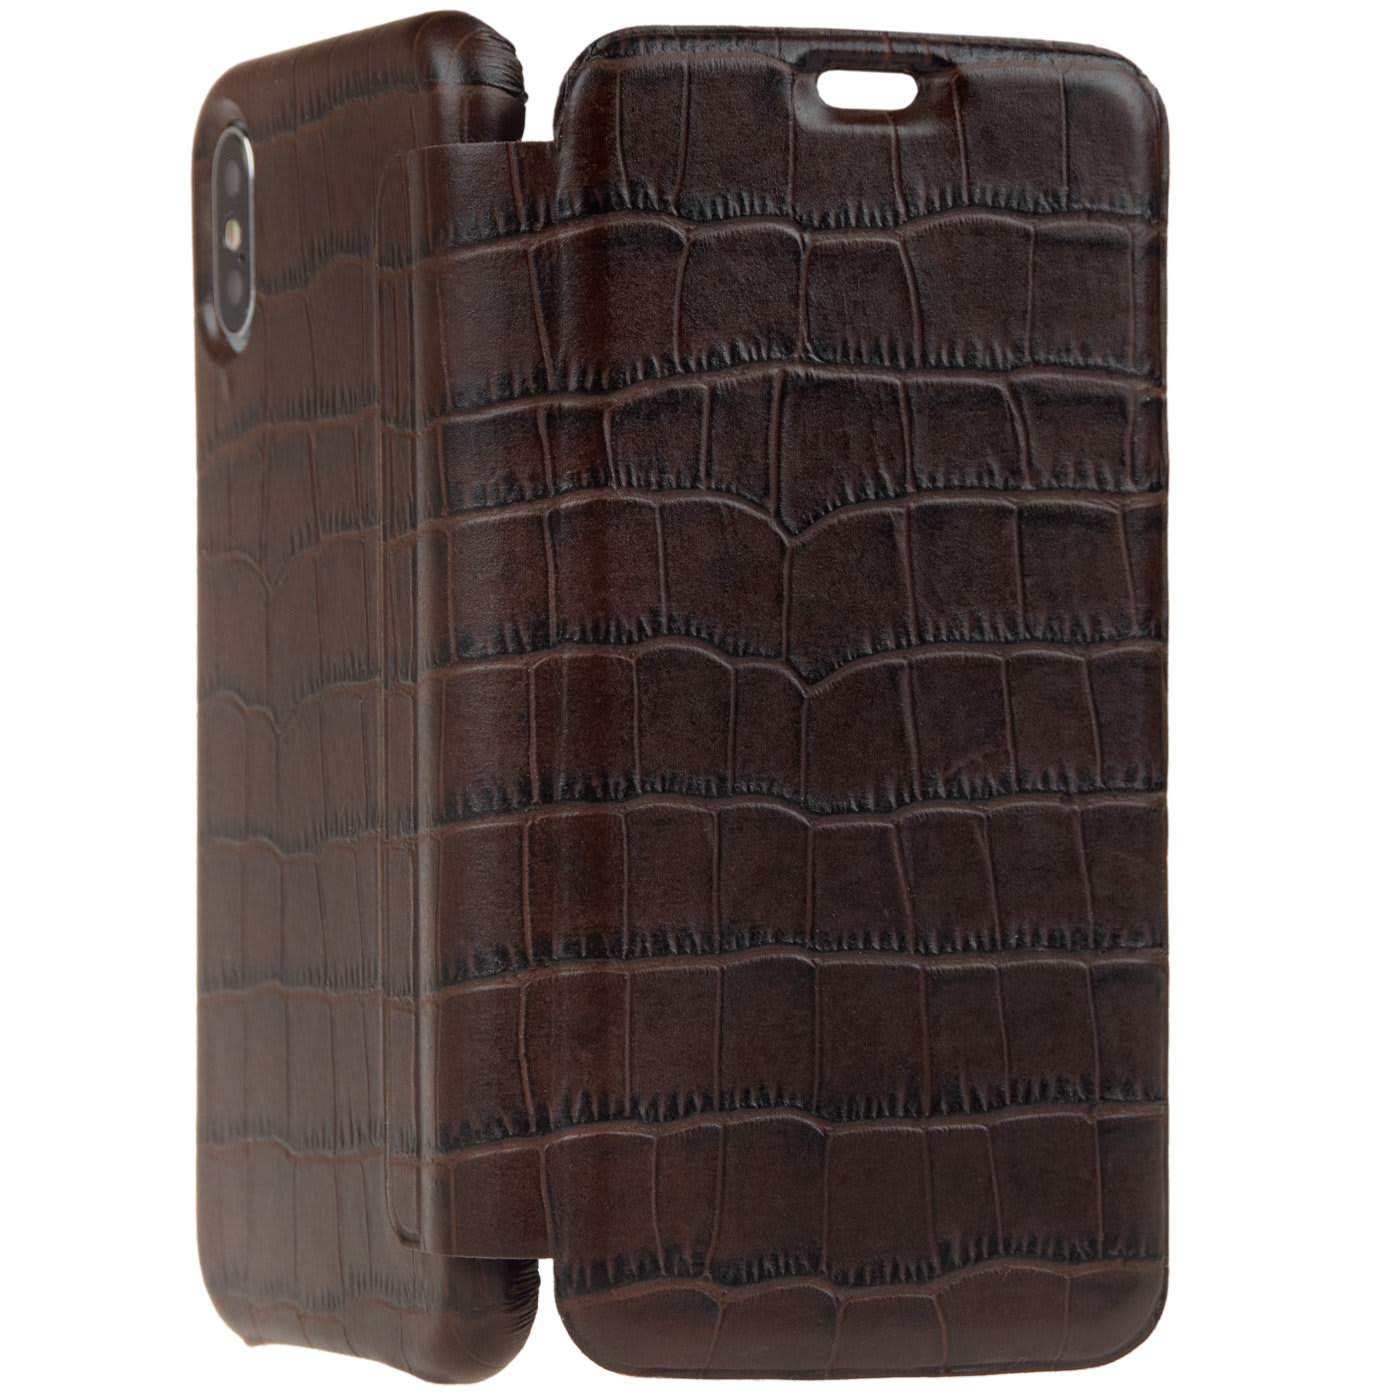 Crocco Dark Brown Leather Booklet Case - Carastyle